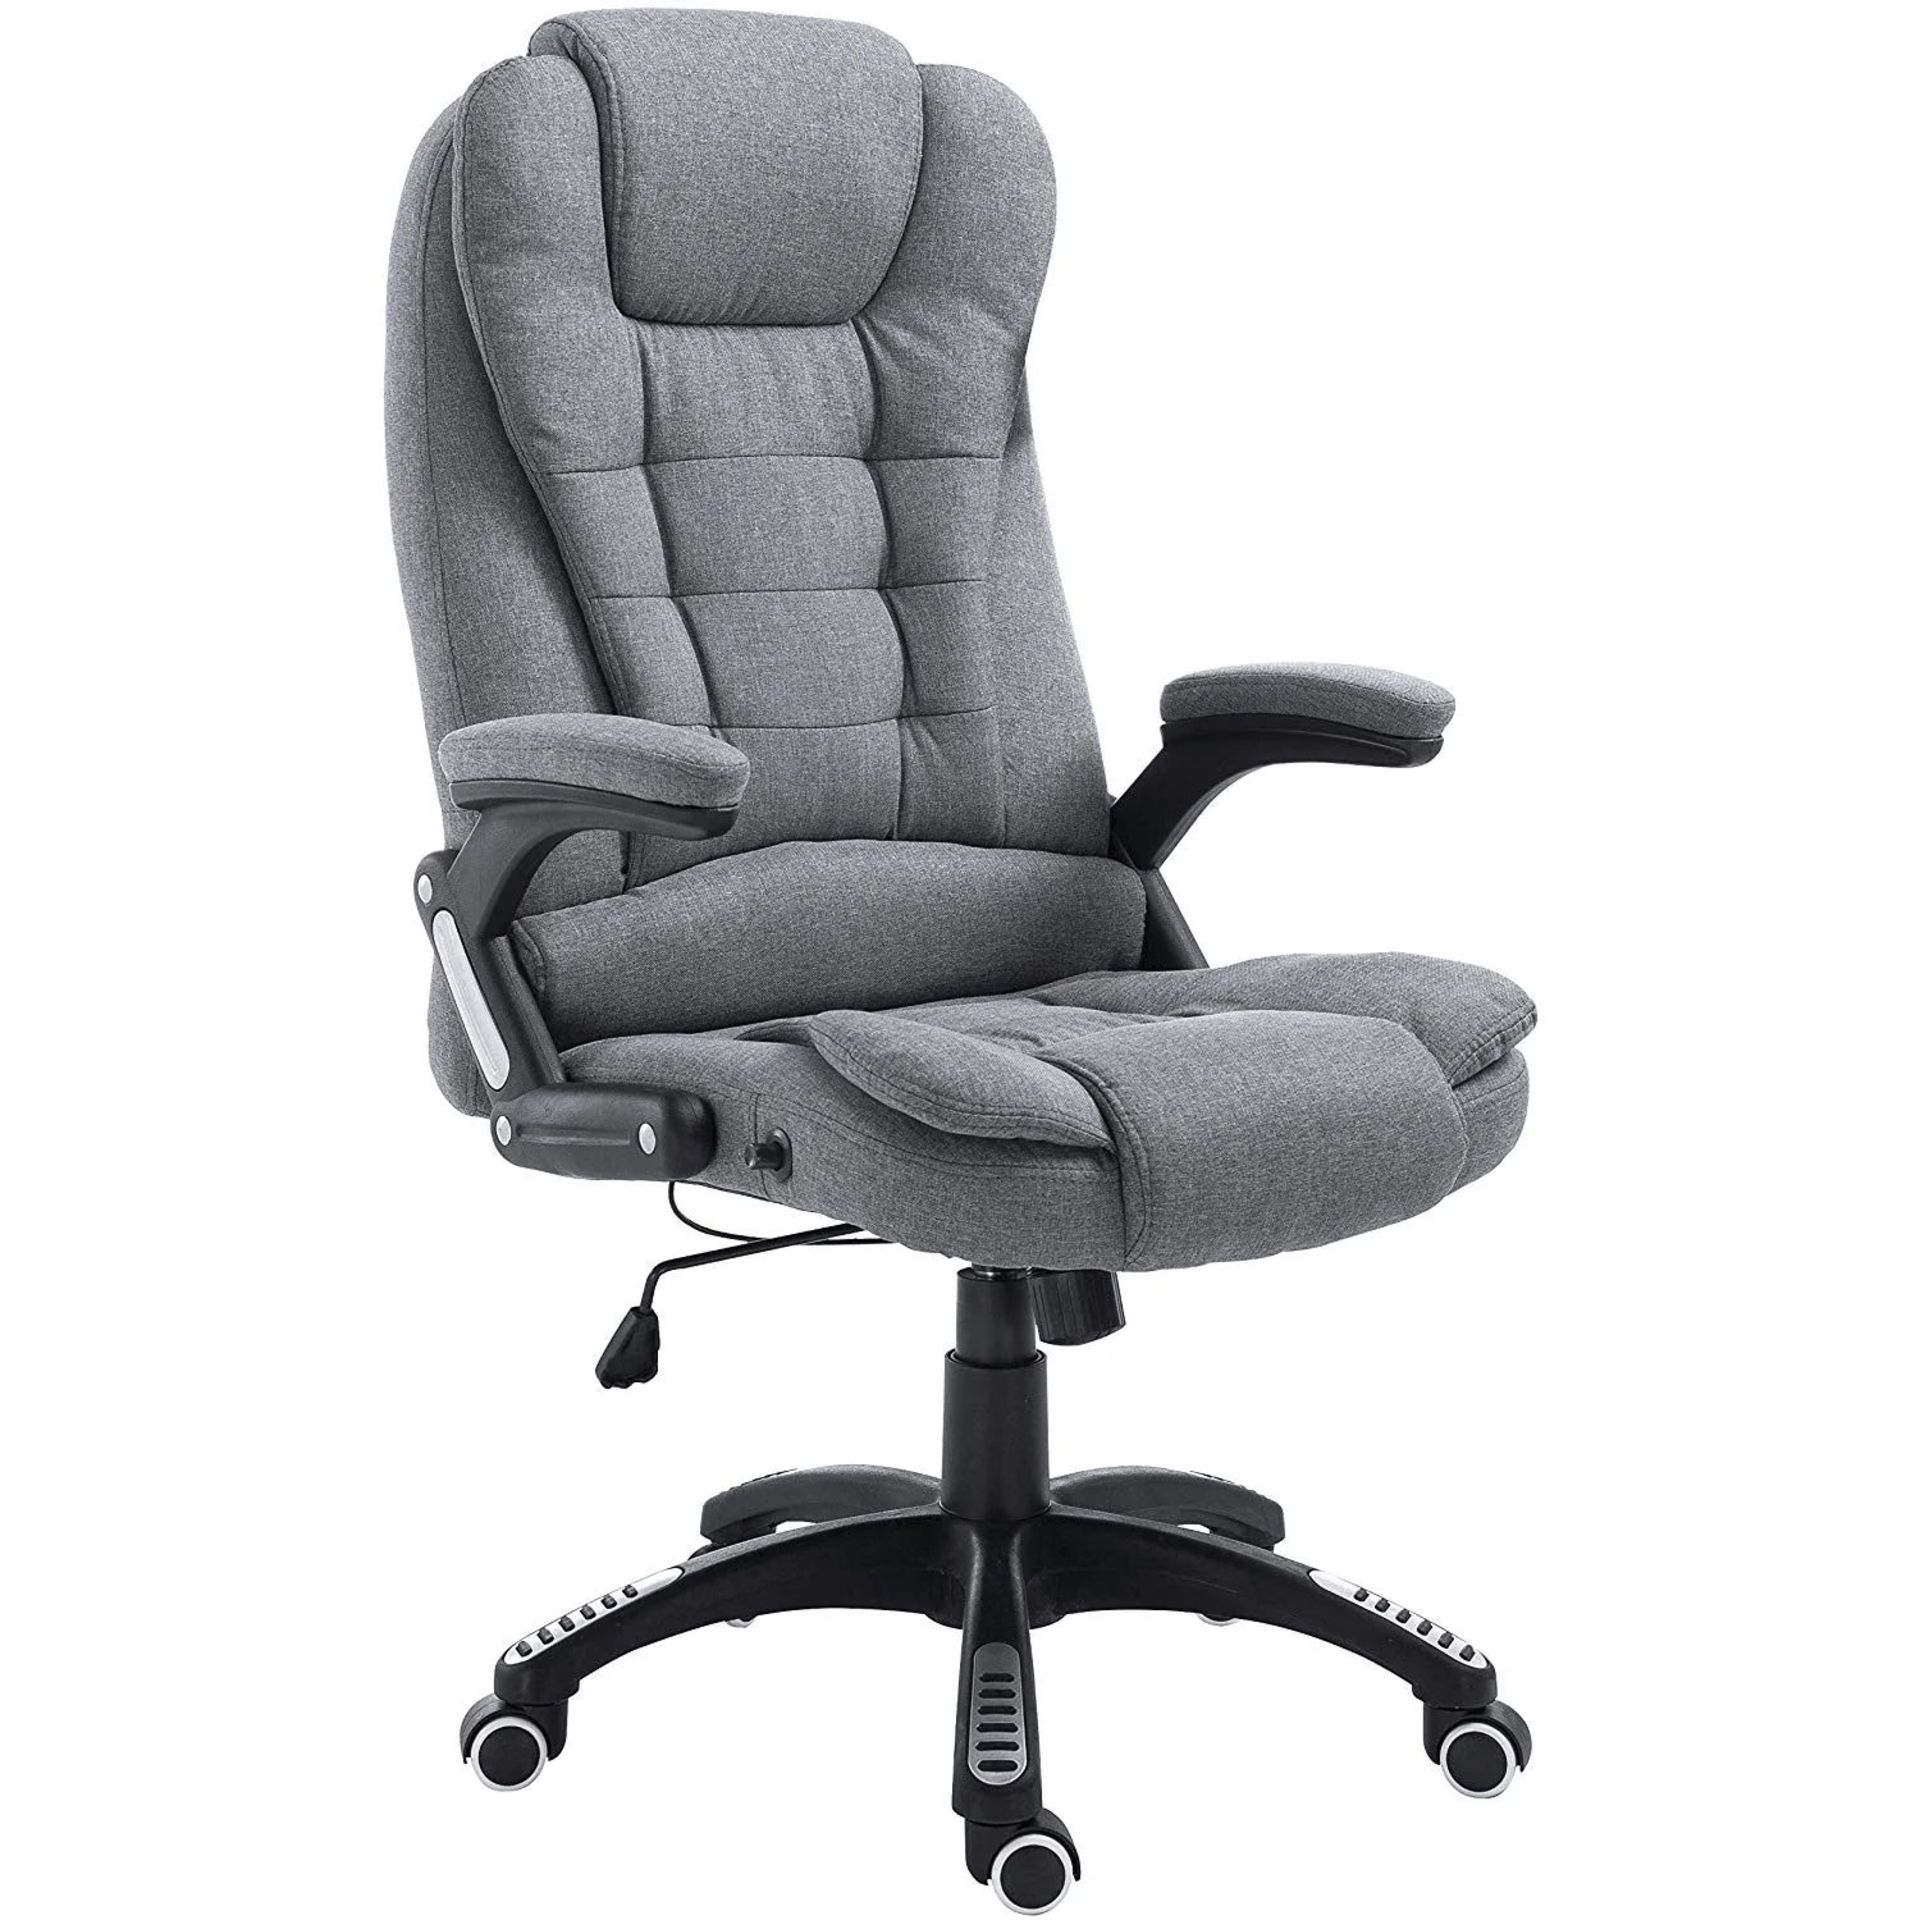 Cherry Tree Furniture Executive Recline Extra Padded Office Chair Standard, MO17 Grey Fabric. -ER29